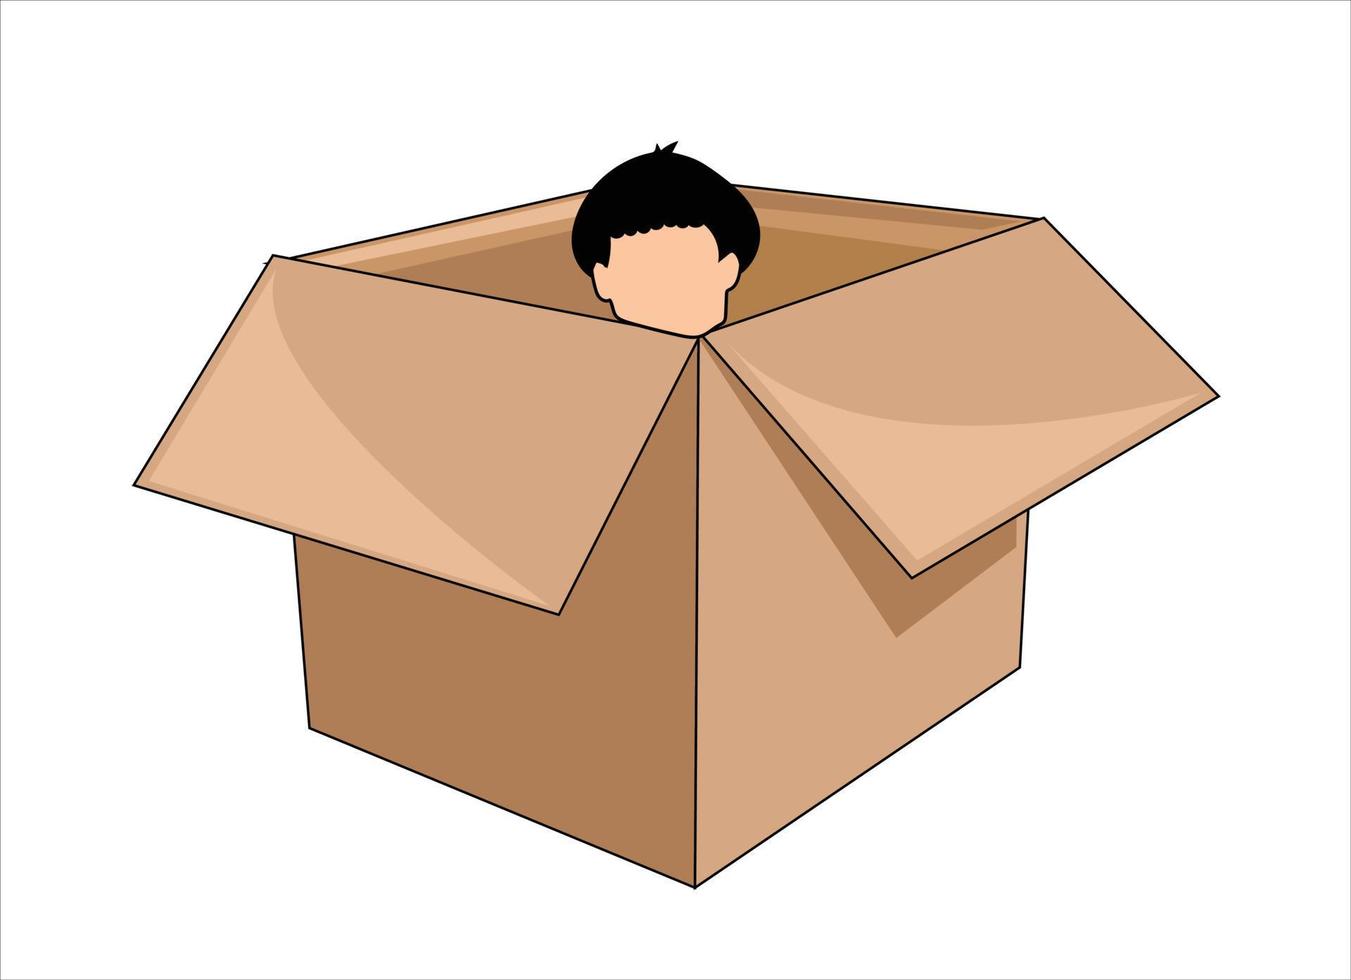 The person hiding in a box isolated on a white vector illustration